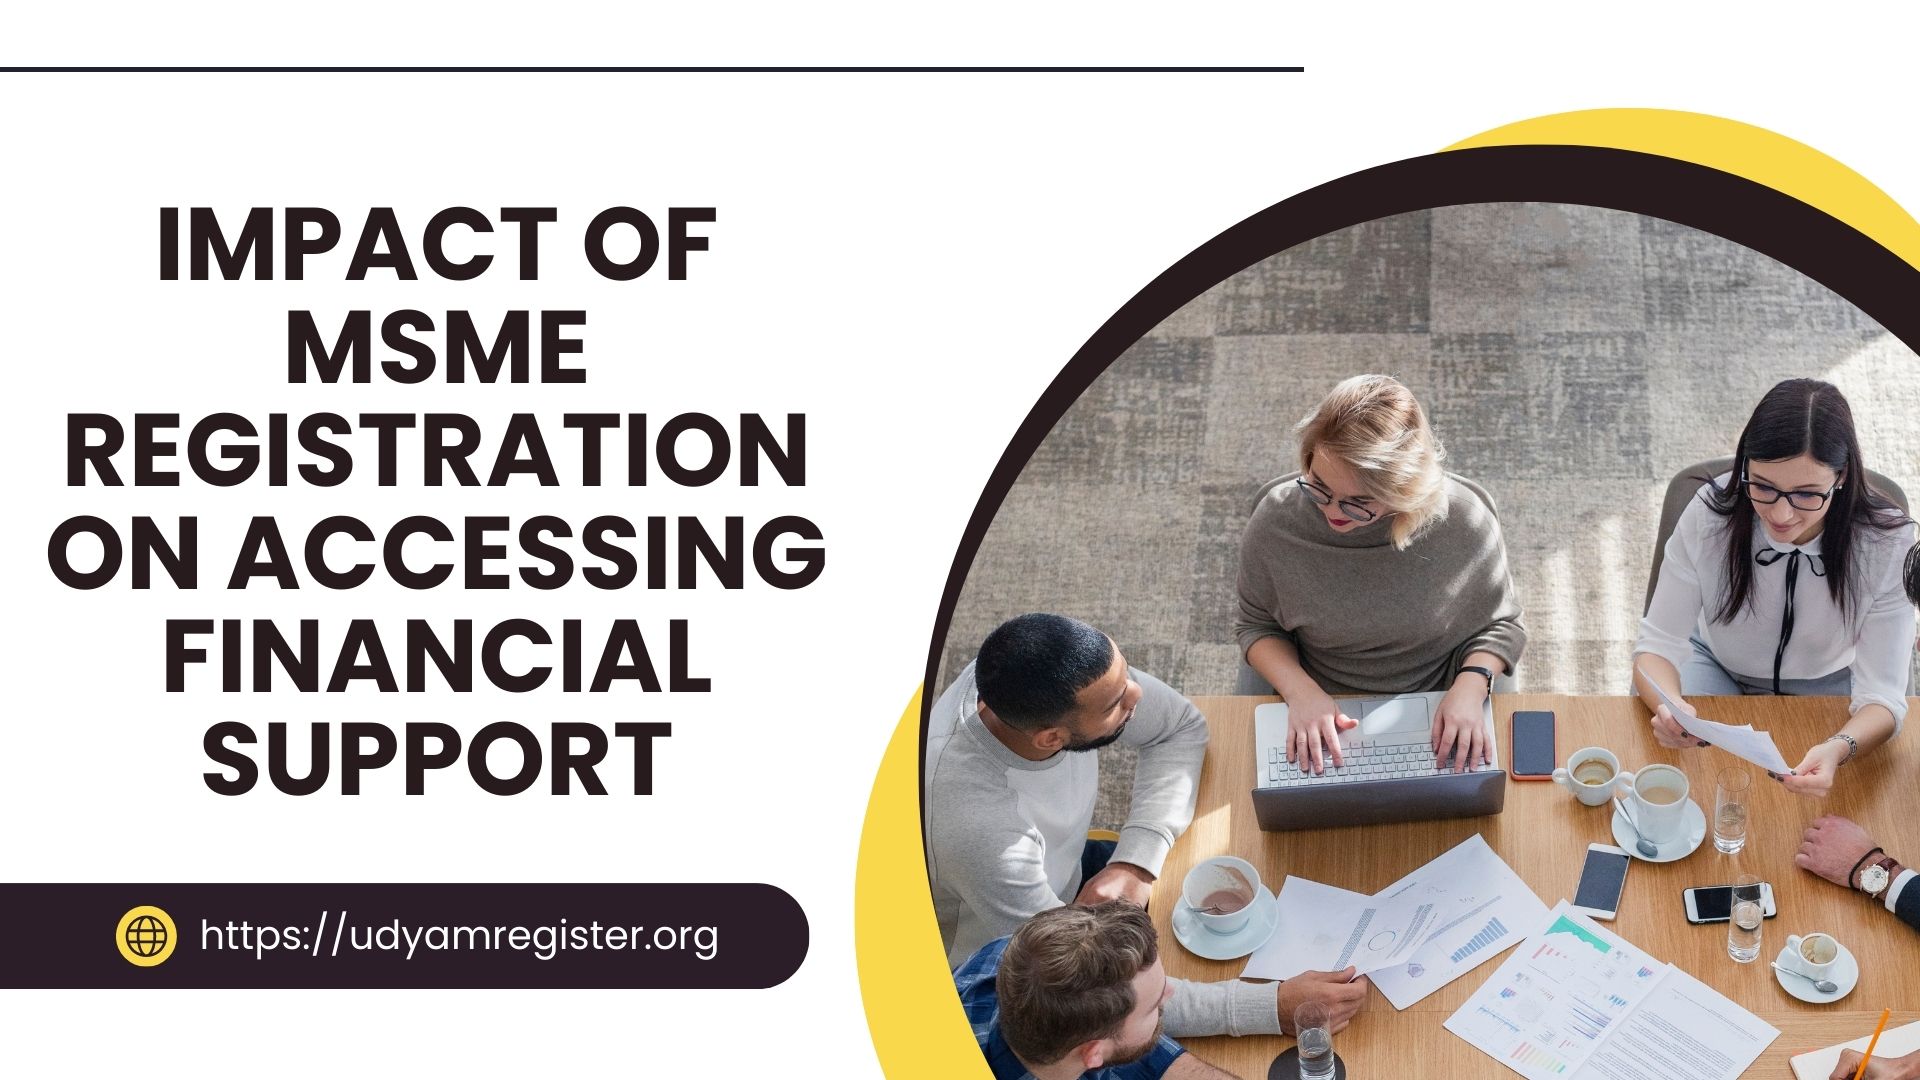 Impact of MSME registration on accessing financial support